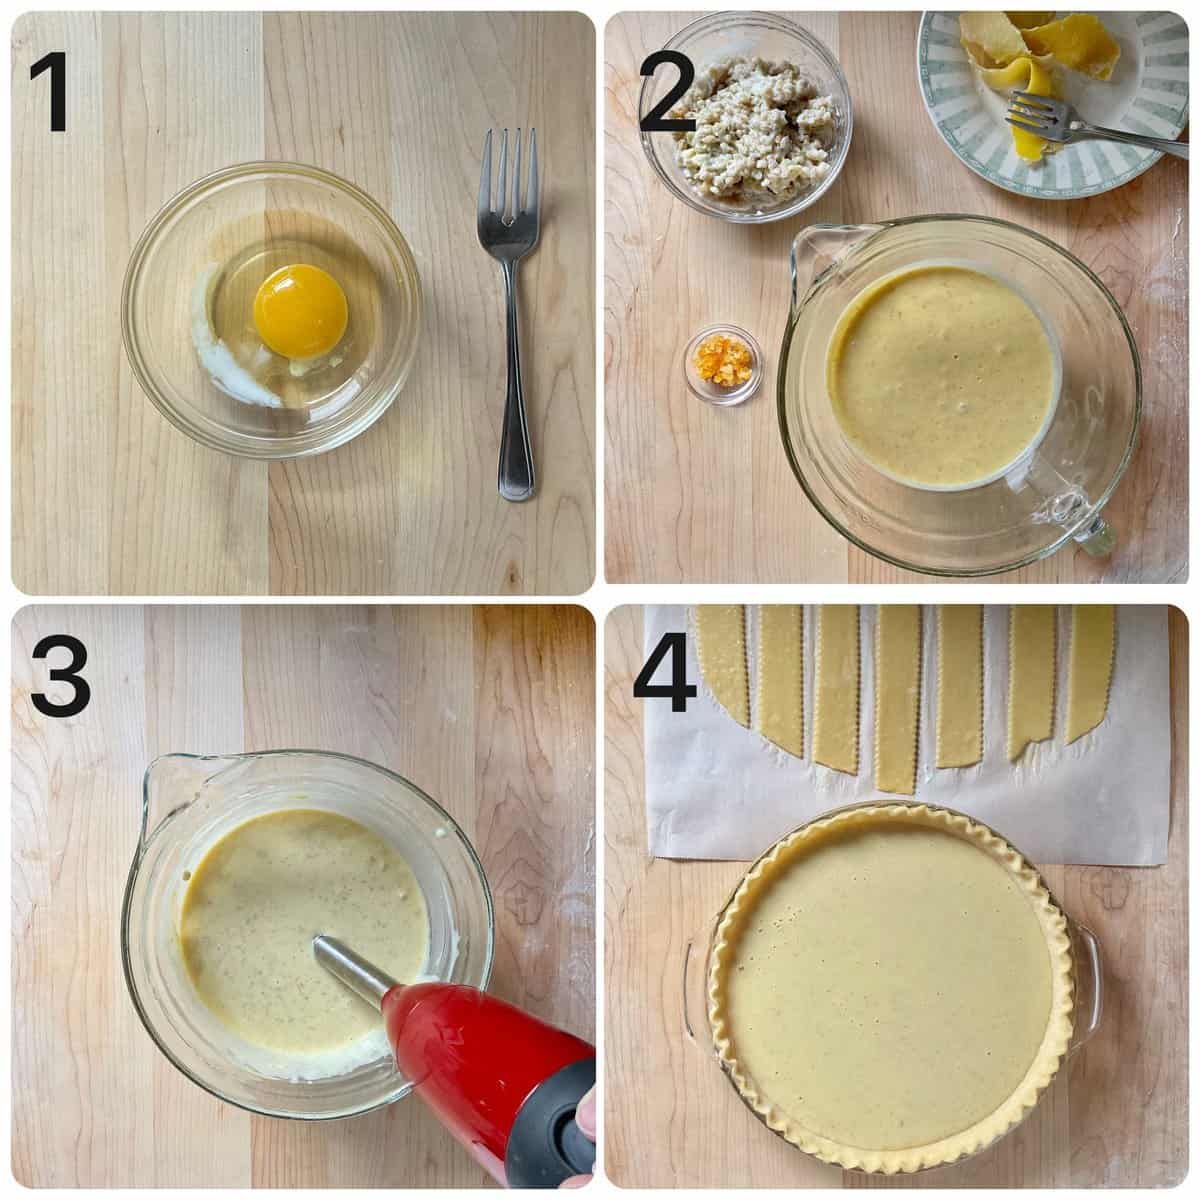 The step by step process to combine the ricotta and cooked wheat filling.